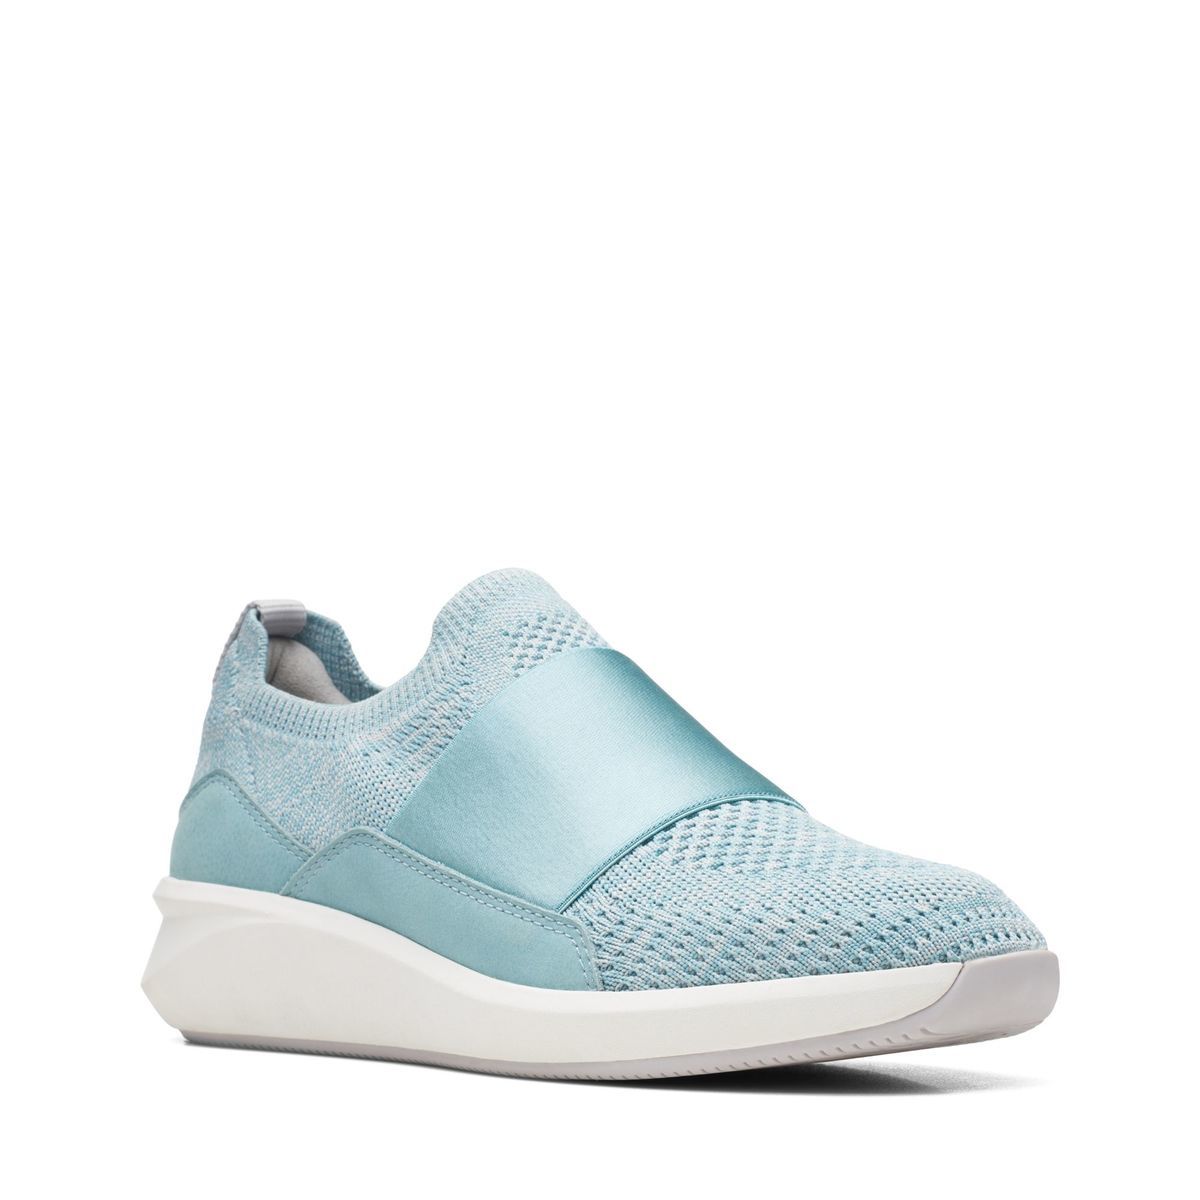 Clarks Un Rio Knit Turquoise Womens trainers 6630-94D in a Plain Textile in Size 4